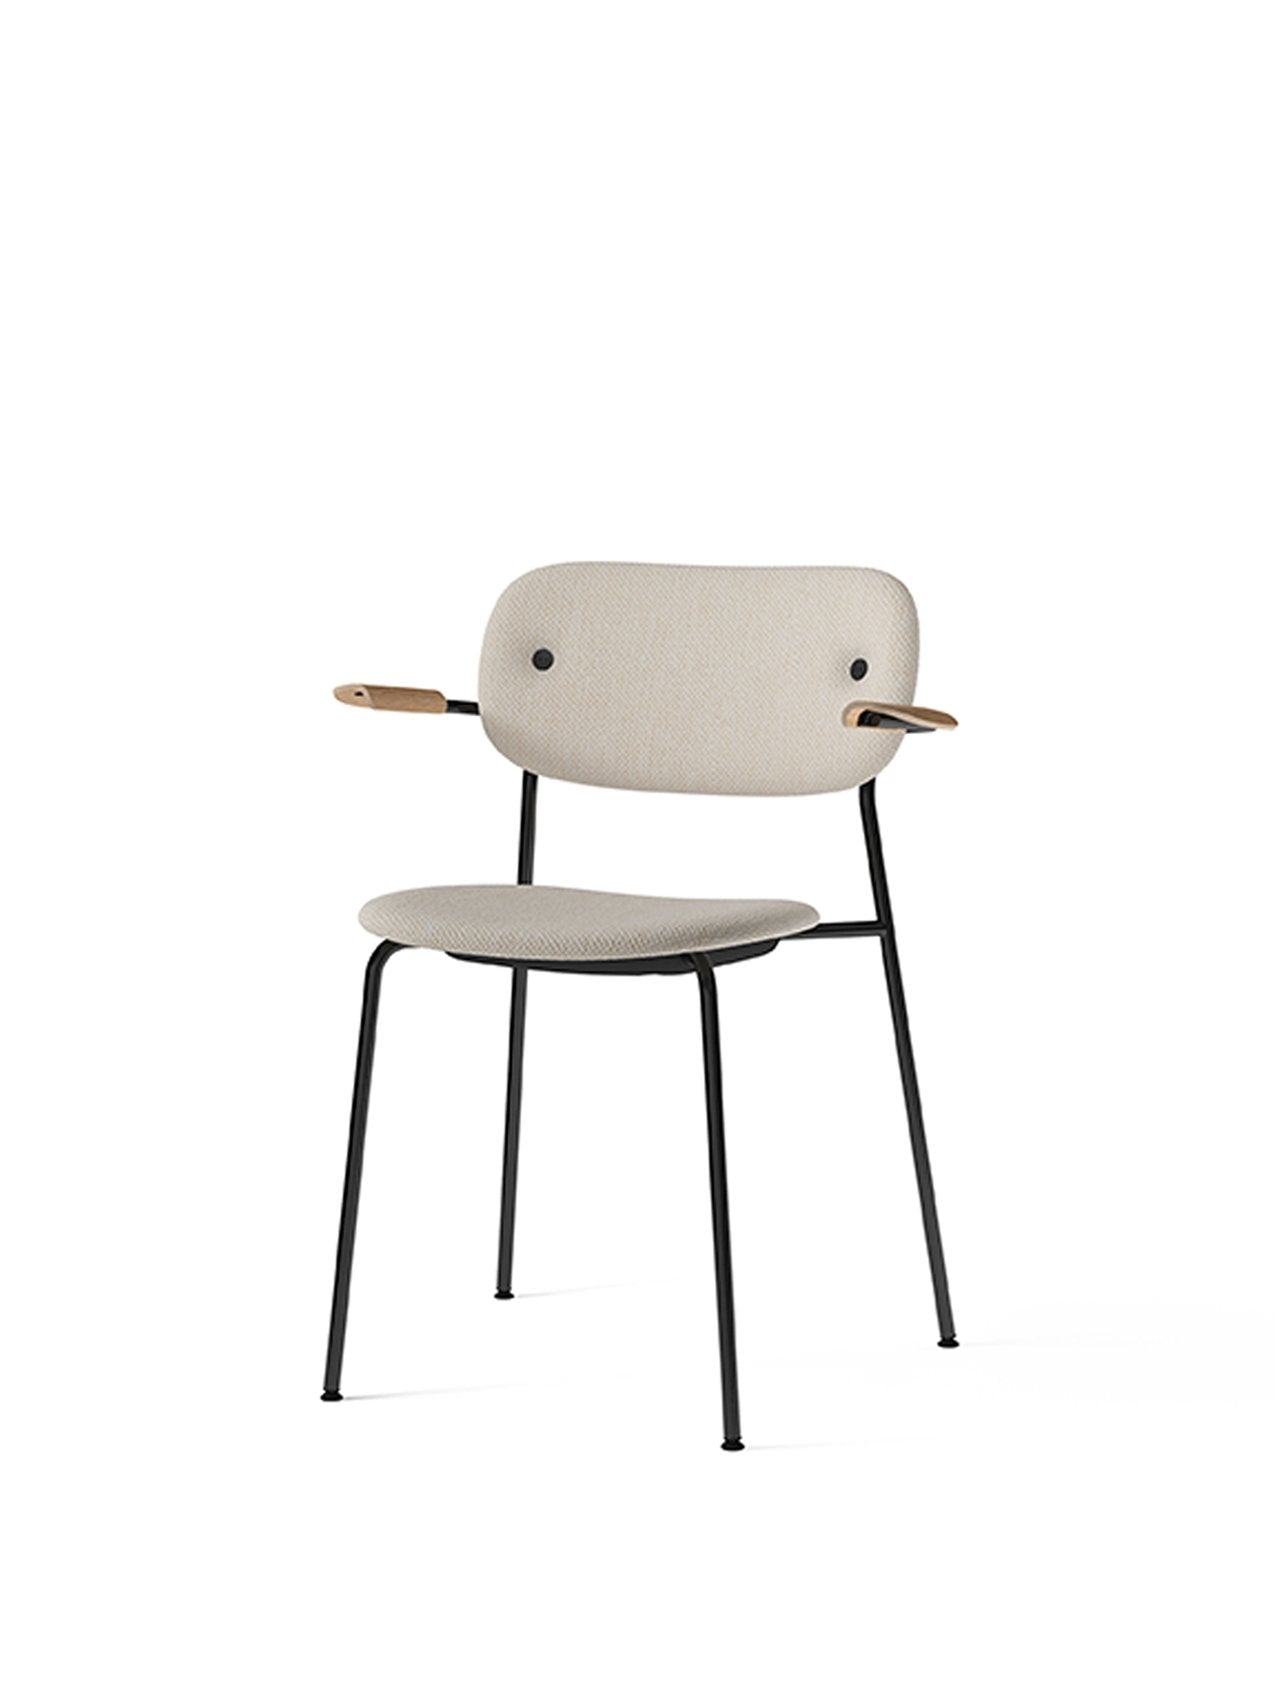 Co Chair, Fully Upholstered-Chair-Norm Architects-menu-minimalist-modern-danish-design-home-decor